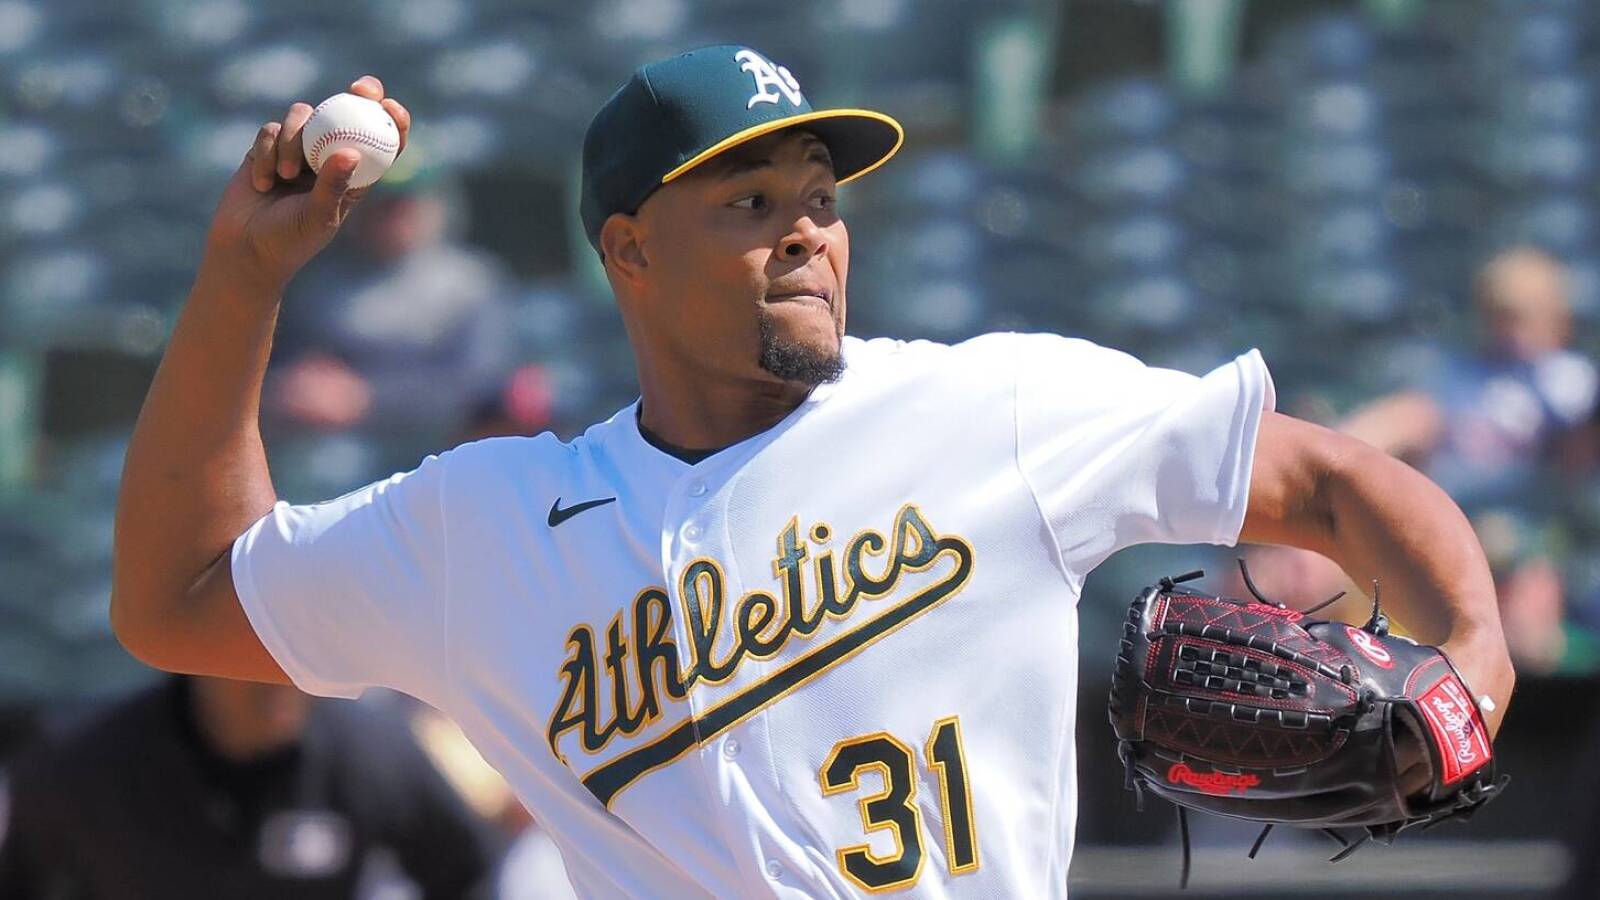 MLB scorer denies A's reliever win after 'ineffective' outing